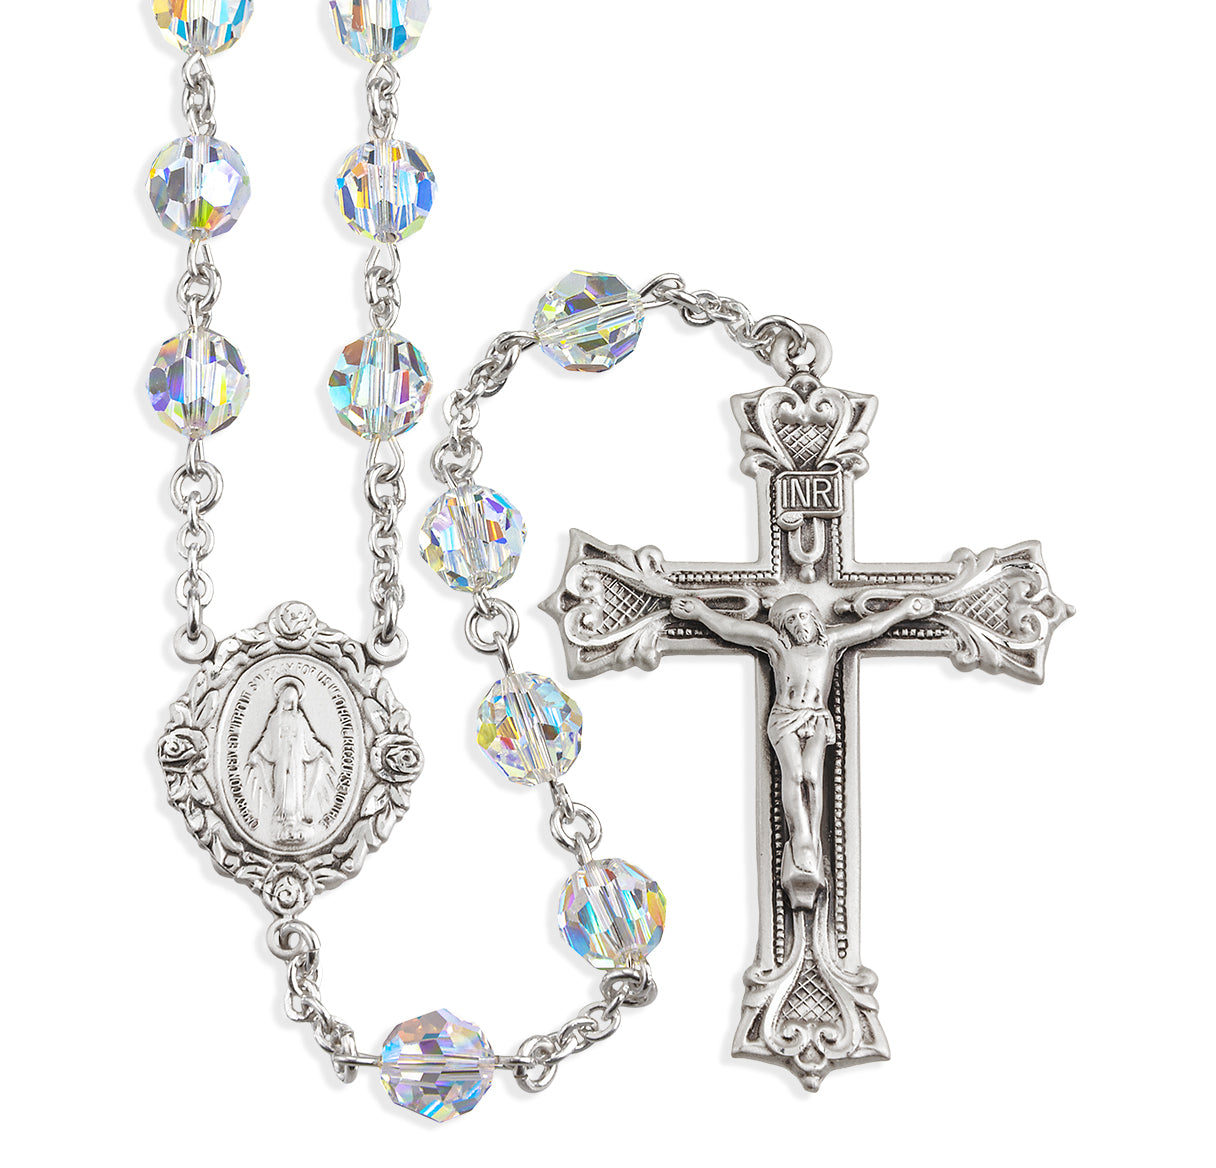 Sterling Silver Rosary Hand Made with Swarovski Crystal 8mm Aurora Borealis Beads by HMH